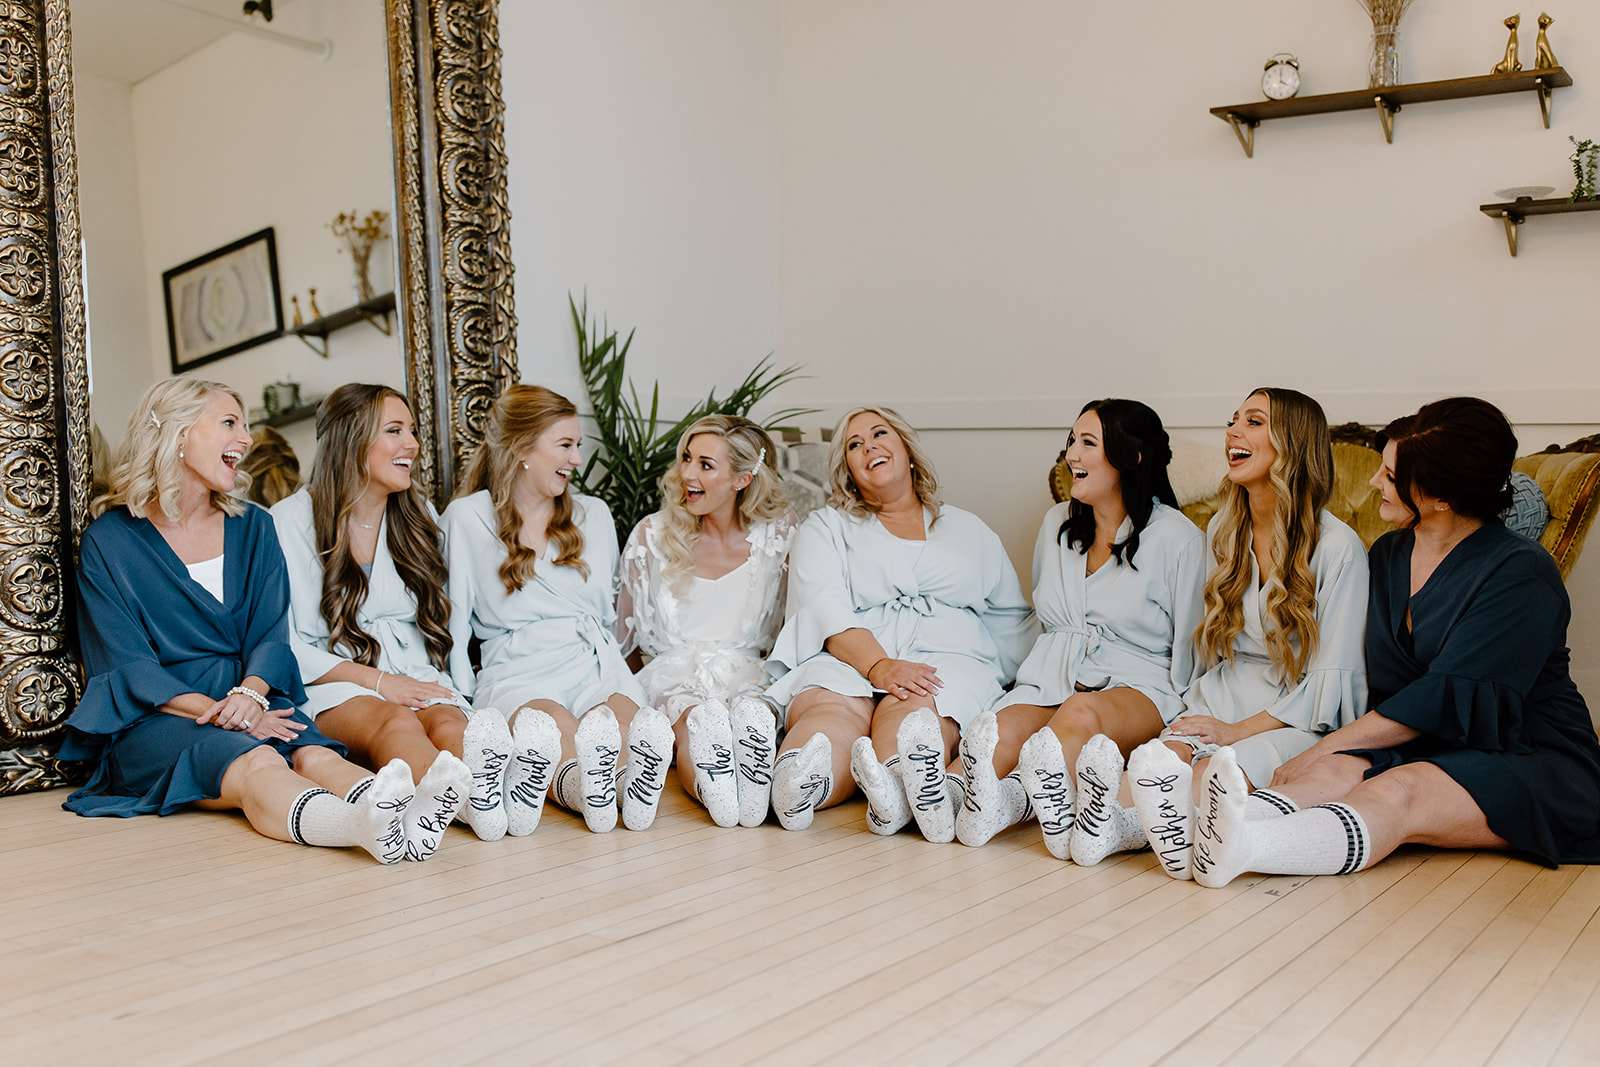 The bride, her bridesmaids, her mom, and her mother in law sit on the floor in their getting ready outfits and socks.